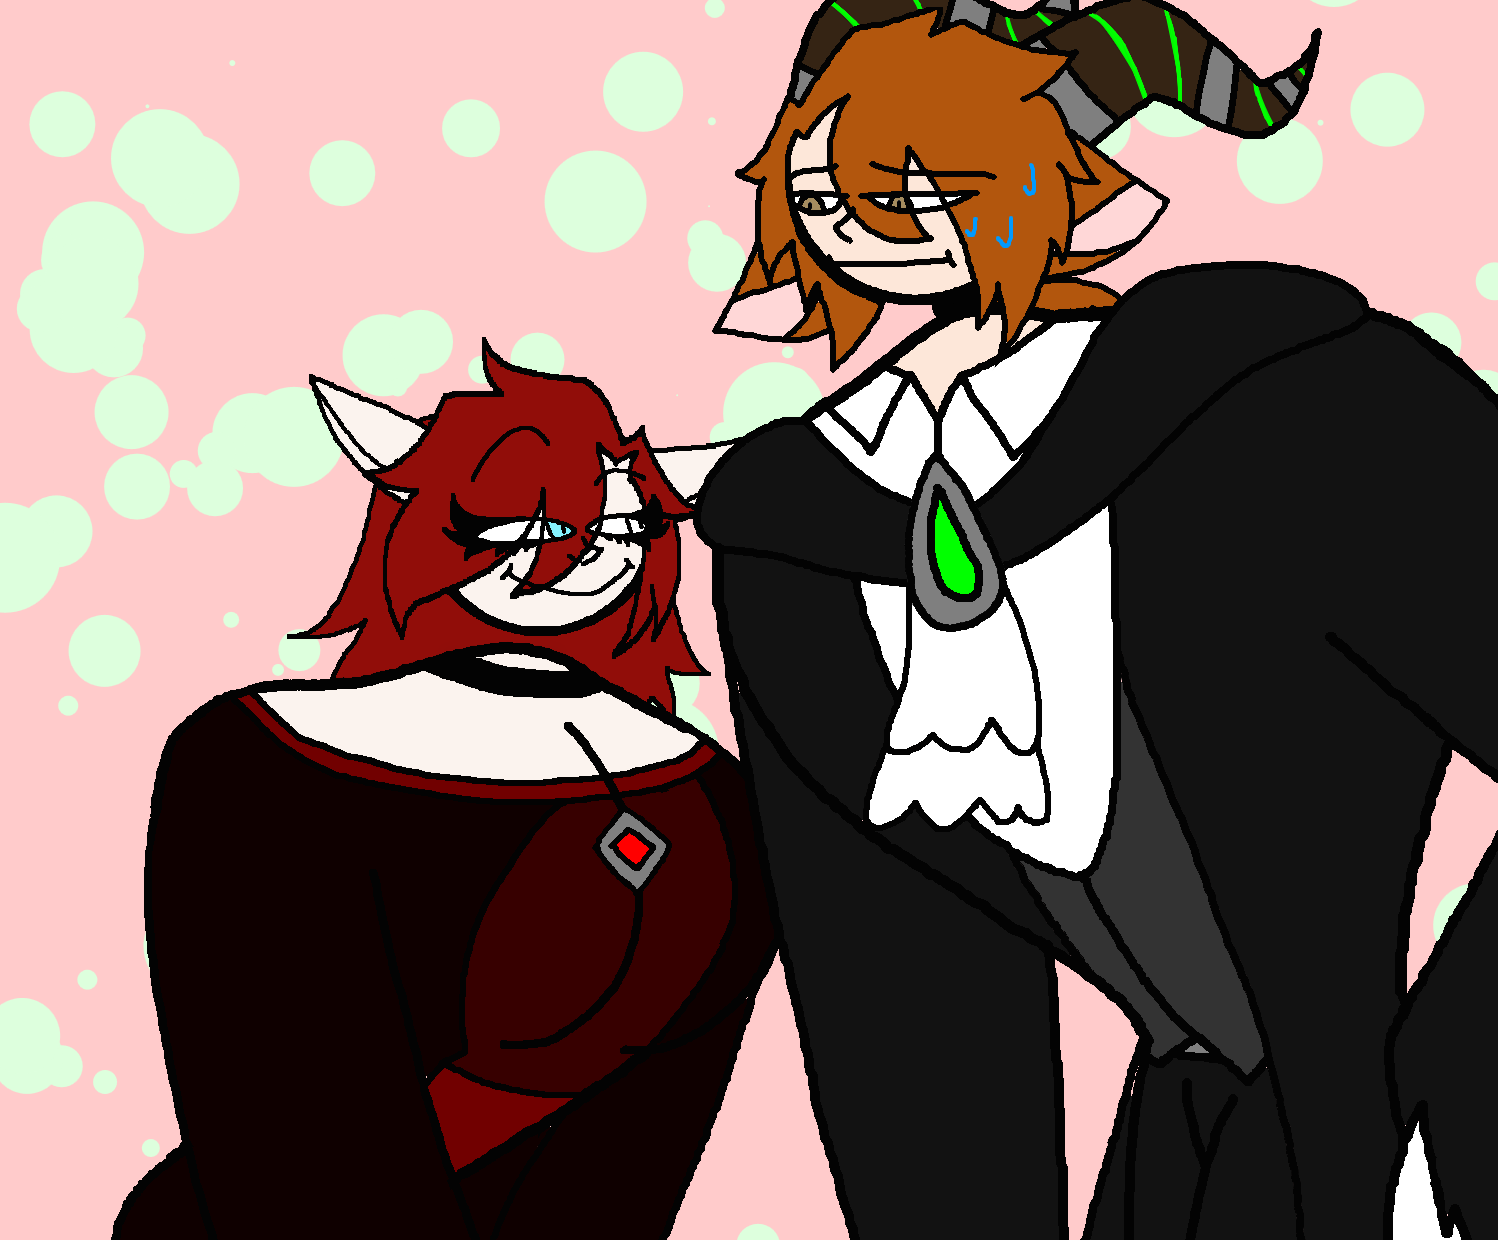 Scarlet and alekos being funny (art-trade) by nana2514 on DeviantArt